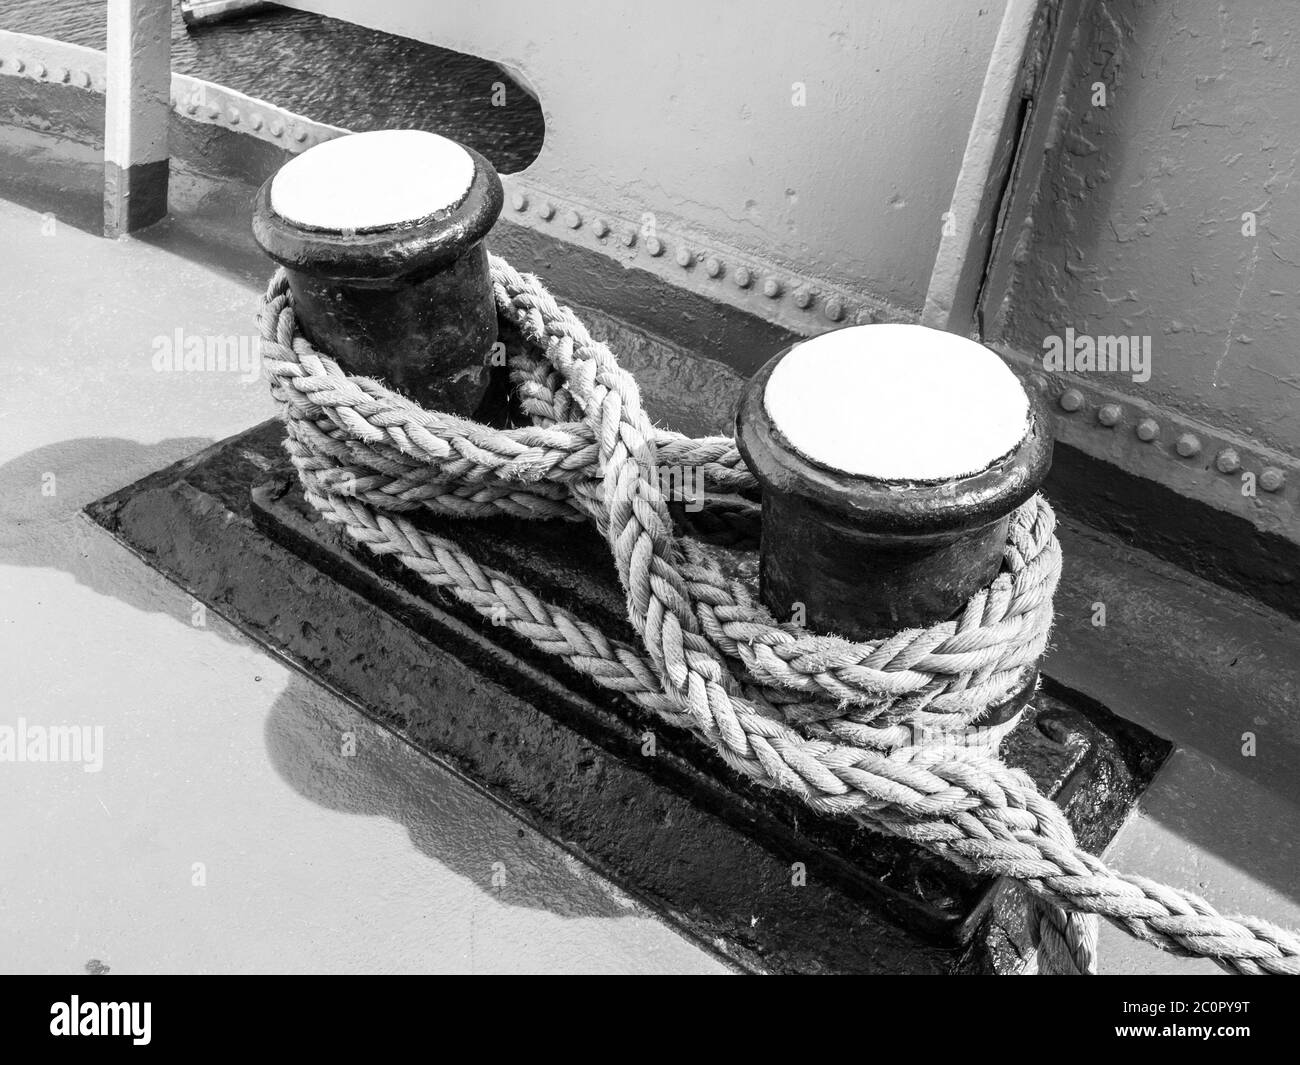 Old mooring bollard on the ship, in black and white Stock Photo